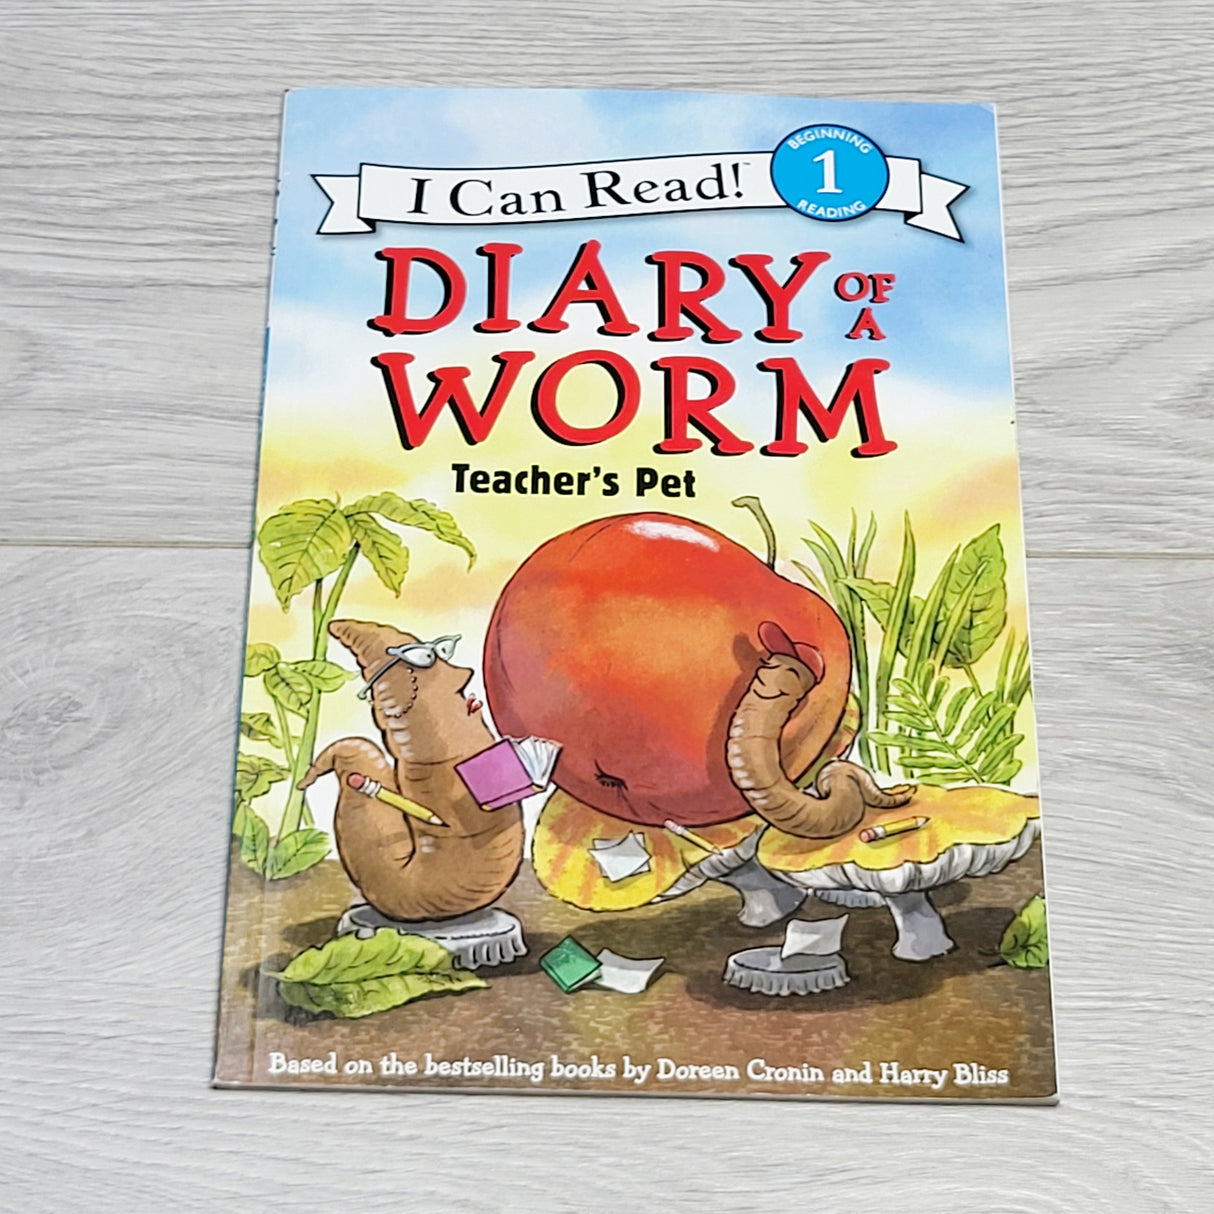 SPLT1 - Diary of a Worm: Techer's Pet. Soft cover chapter book